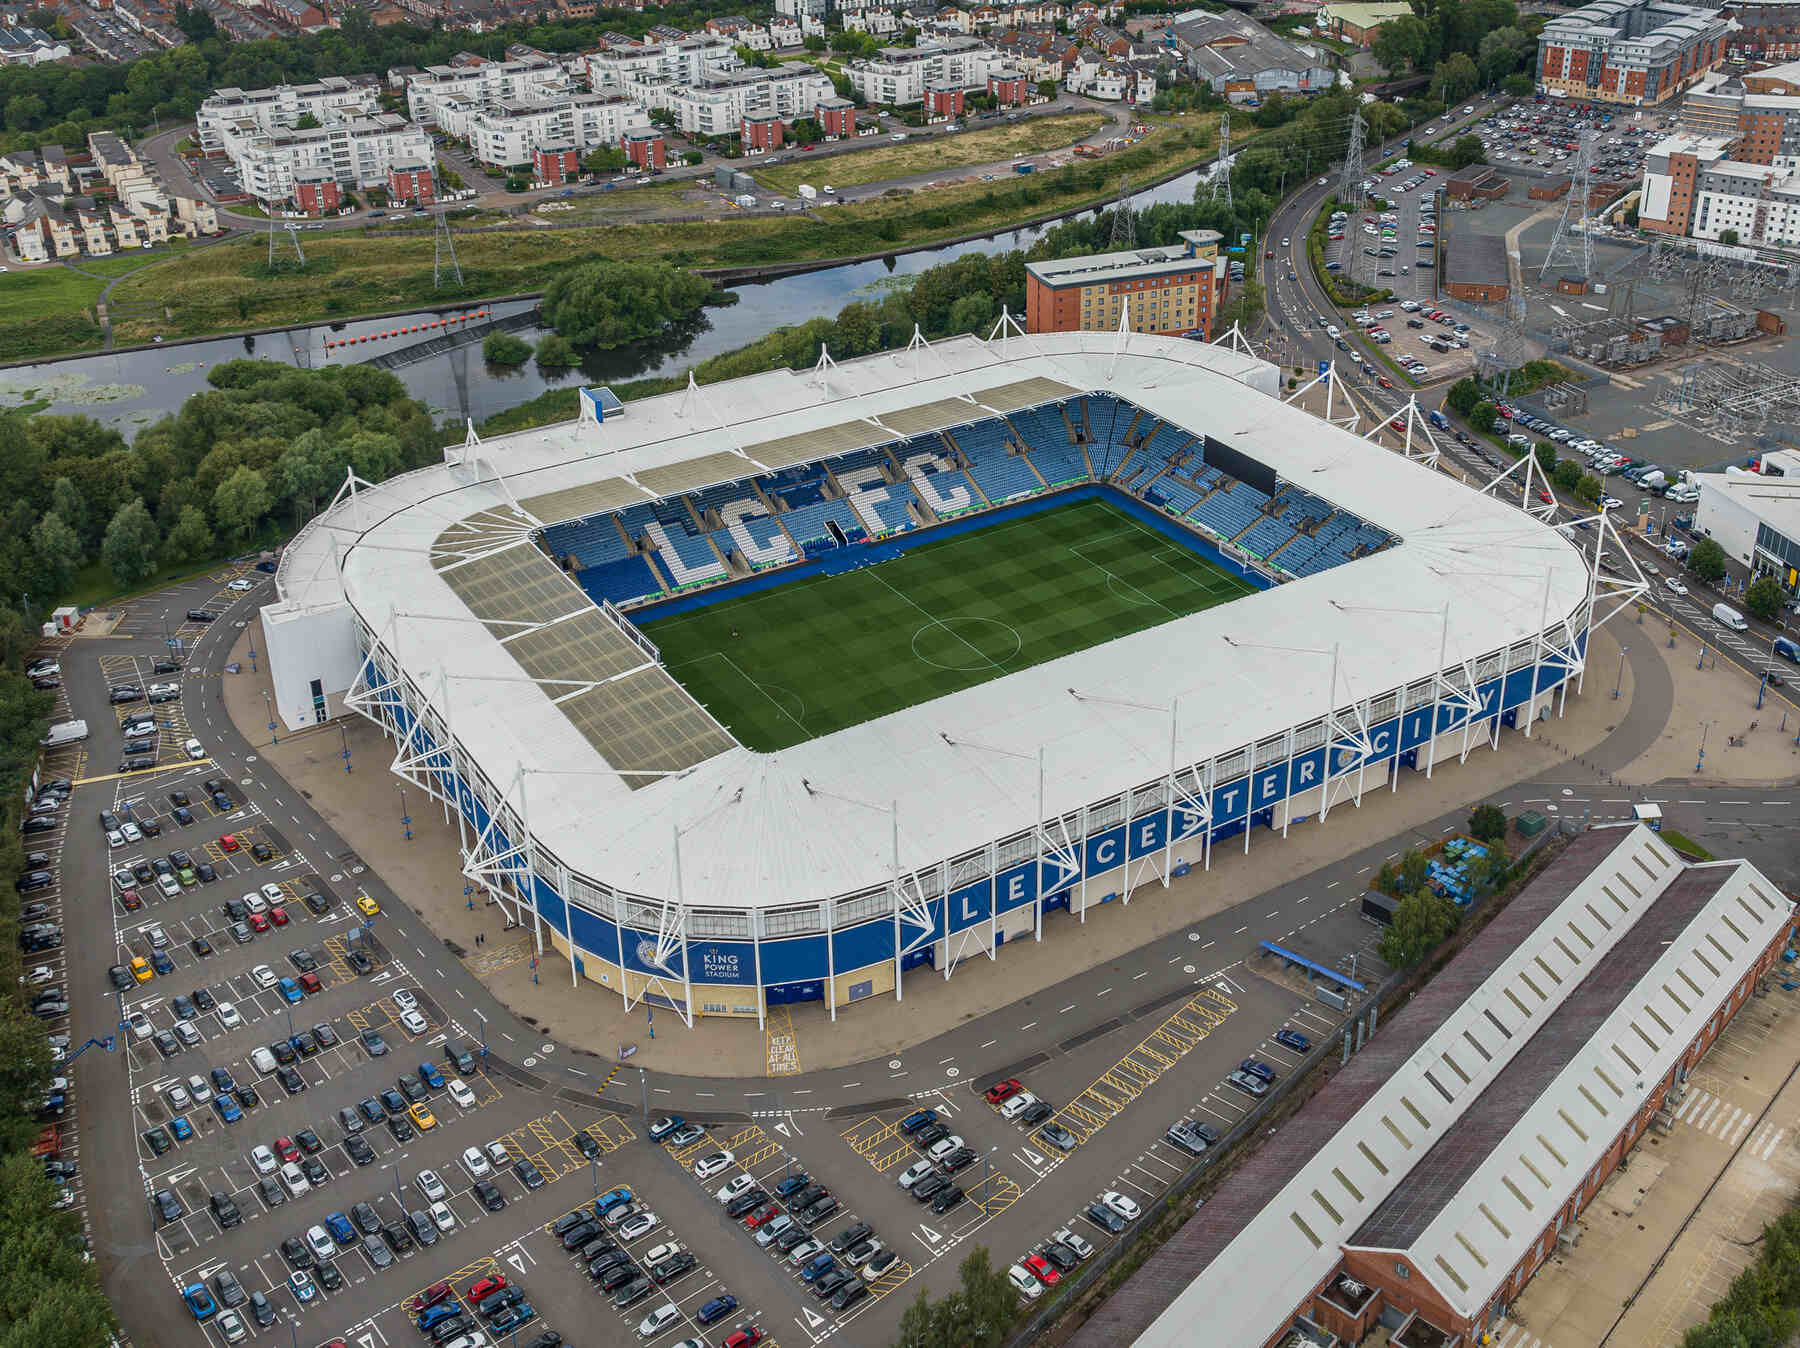 13-astounding-facts-about-king-power-stadium